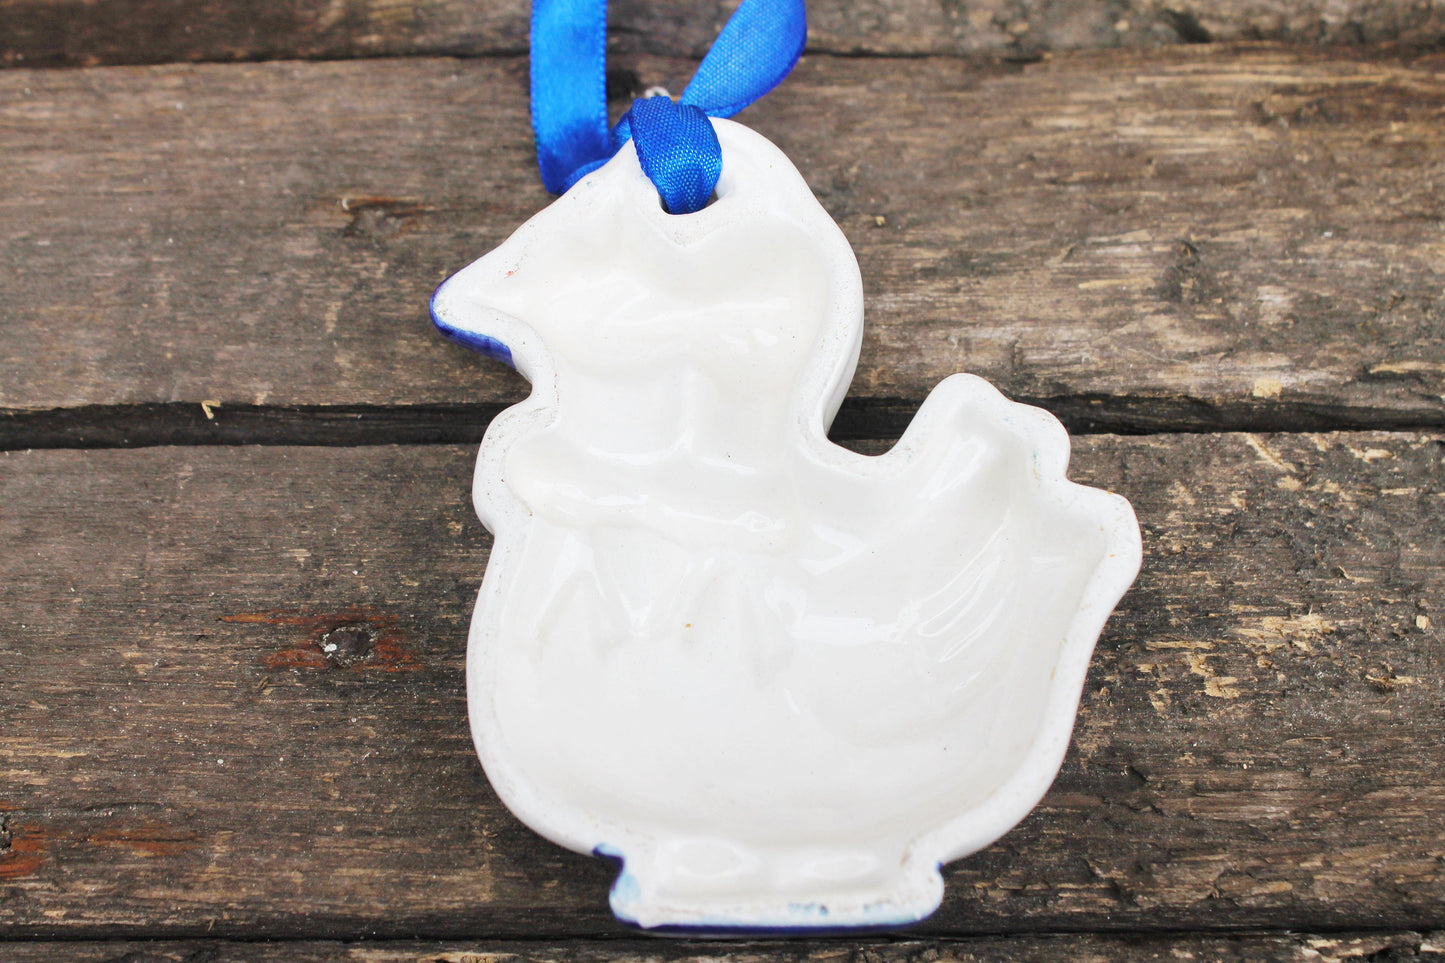 Vintage ceramic couple of ducks ornament - made in Germany - 1980-1990s - kitchen decor figurine